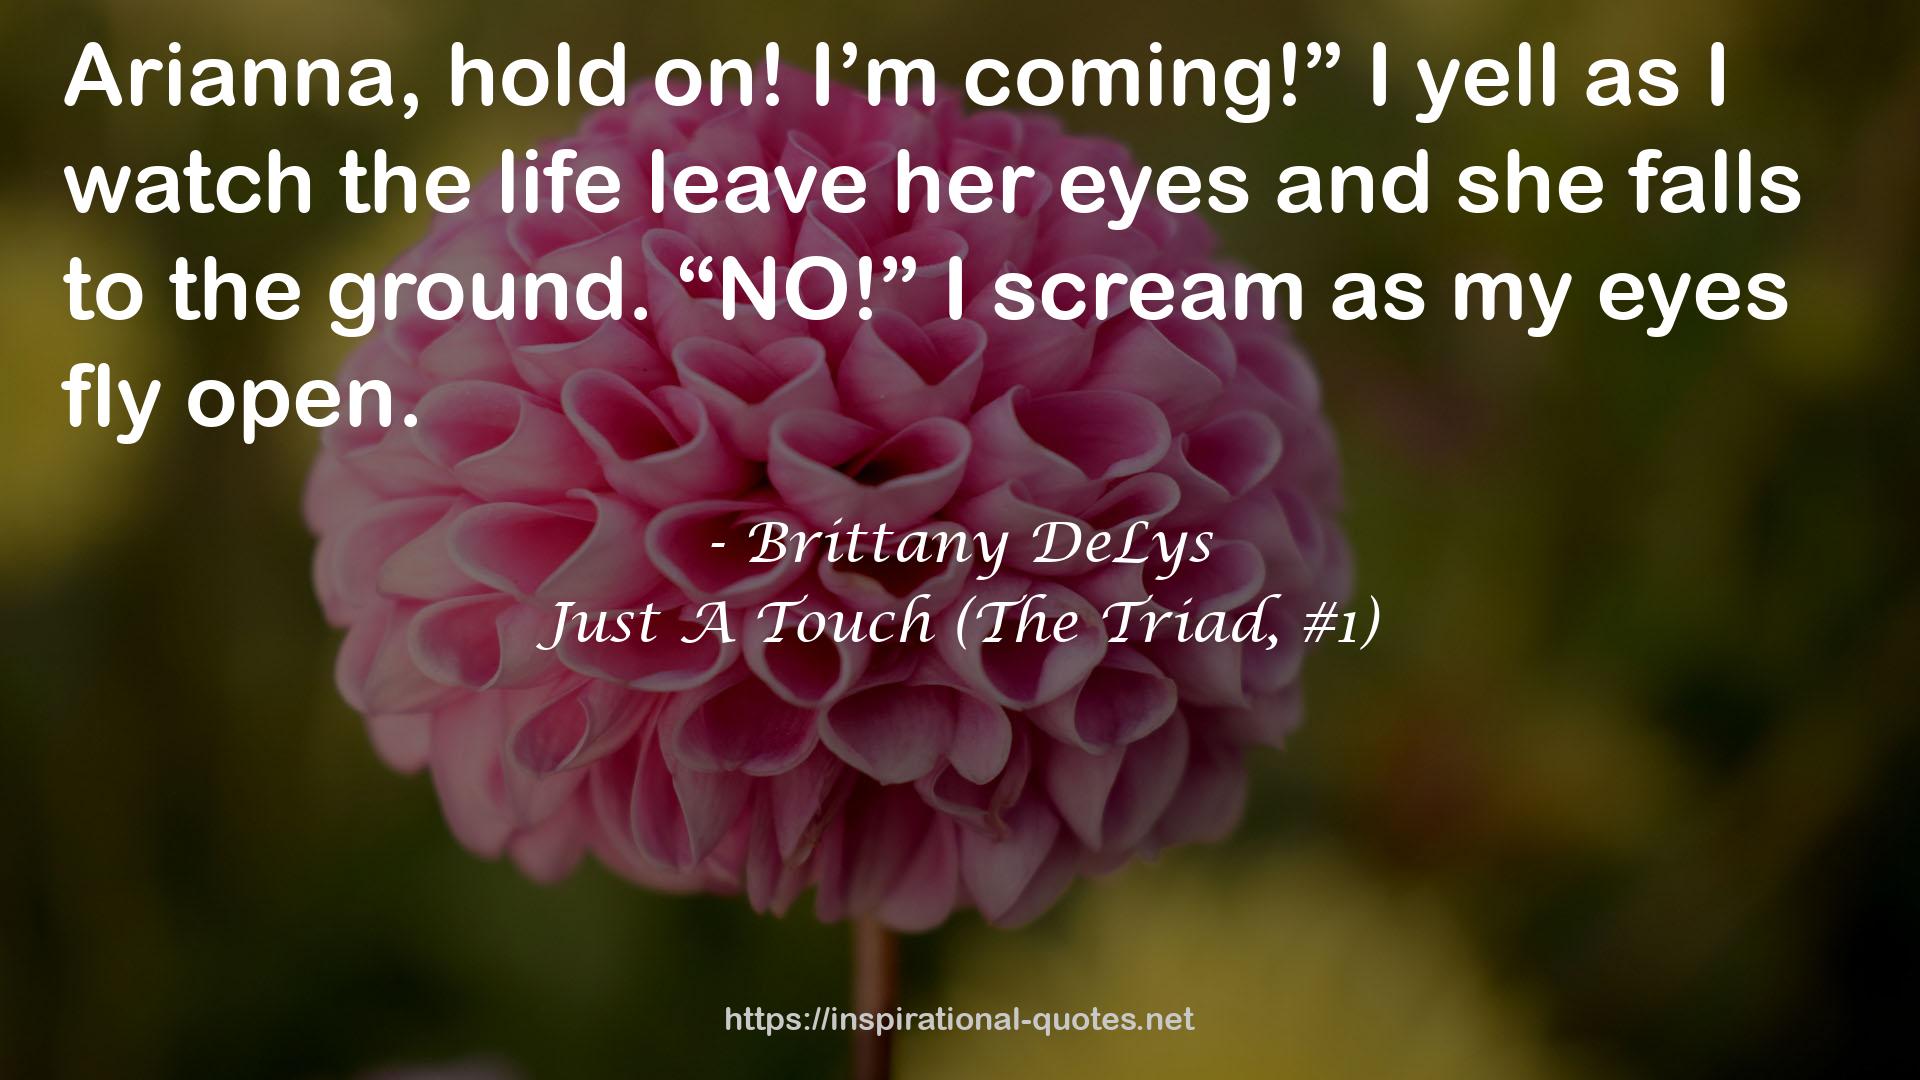 Brittany DeLys QUOTES